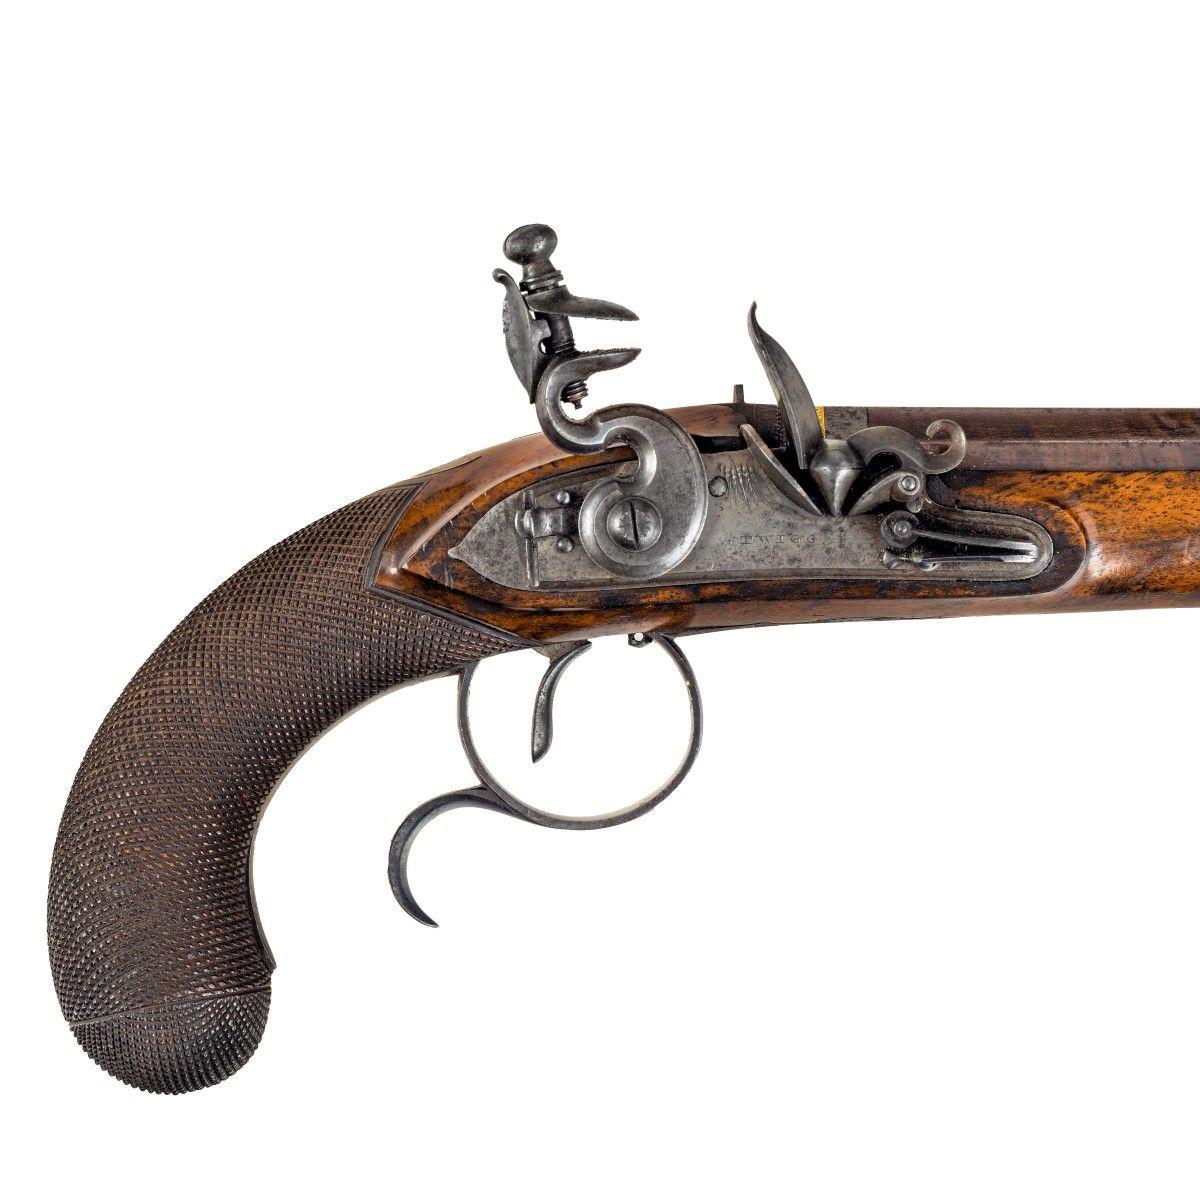 A pair of flintlock duelling pistols by Twigg of London, with octagonal barrels inlaid with gold, walnut stocks and chequered butts. All in the original fitted mahogany case with a steel bullet mould, oil can and cleaning rod. The cover is mounted